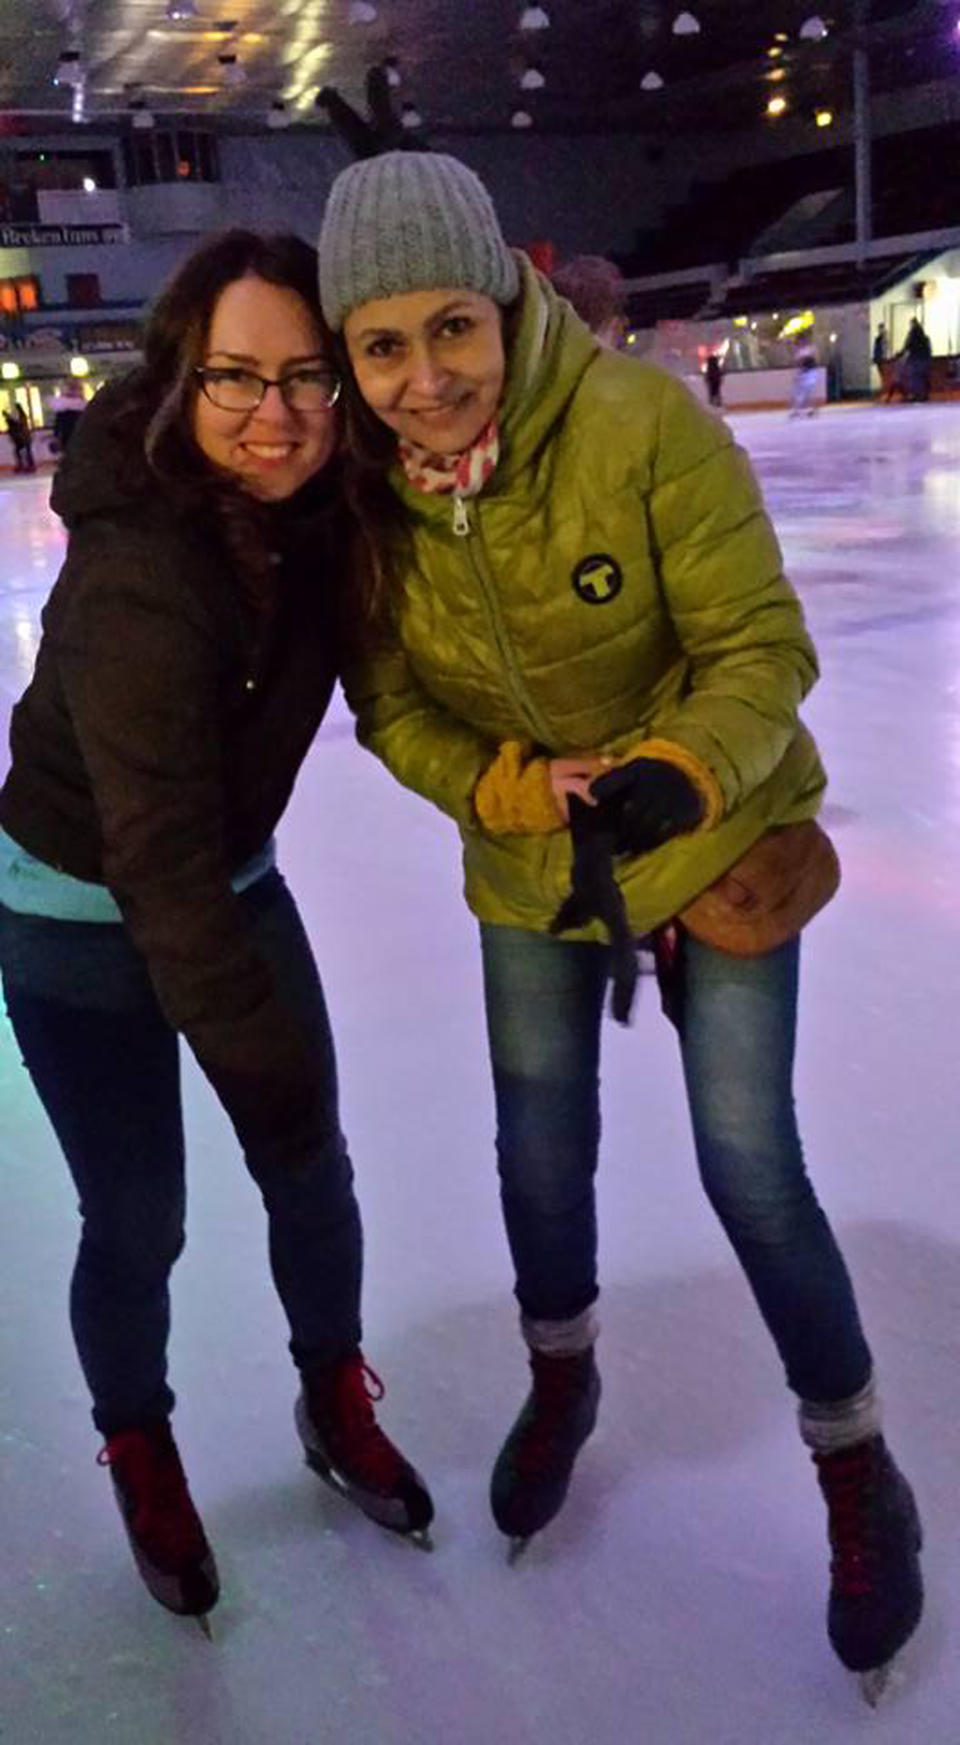 Ice skating in Edinburgh with her best friend Agnieszka Szota (Collect/PA Real Life)